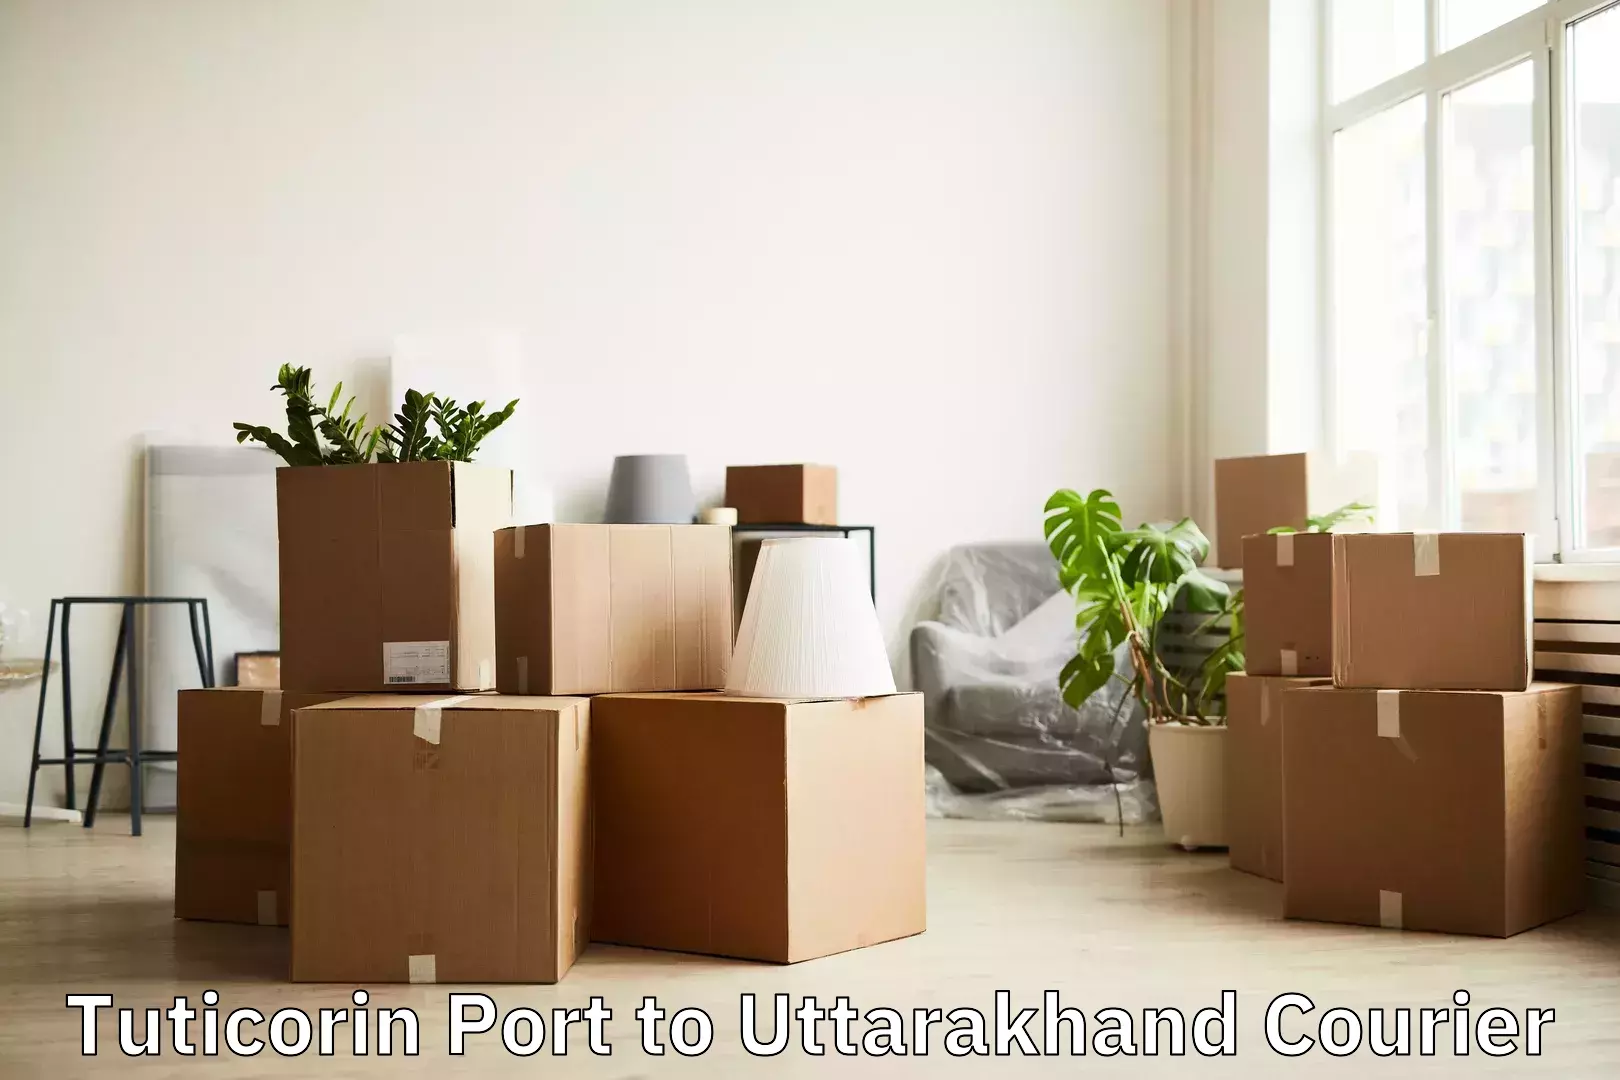 Baggage transport services Tuticorin Port to IIT Roorkee